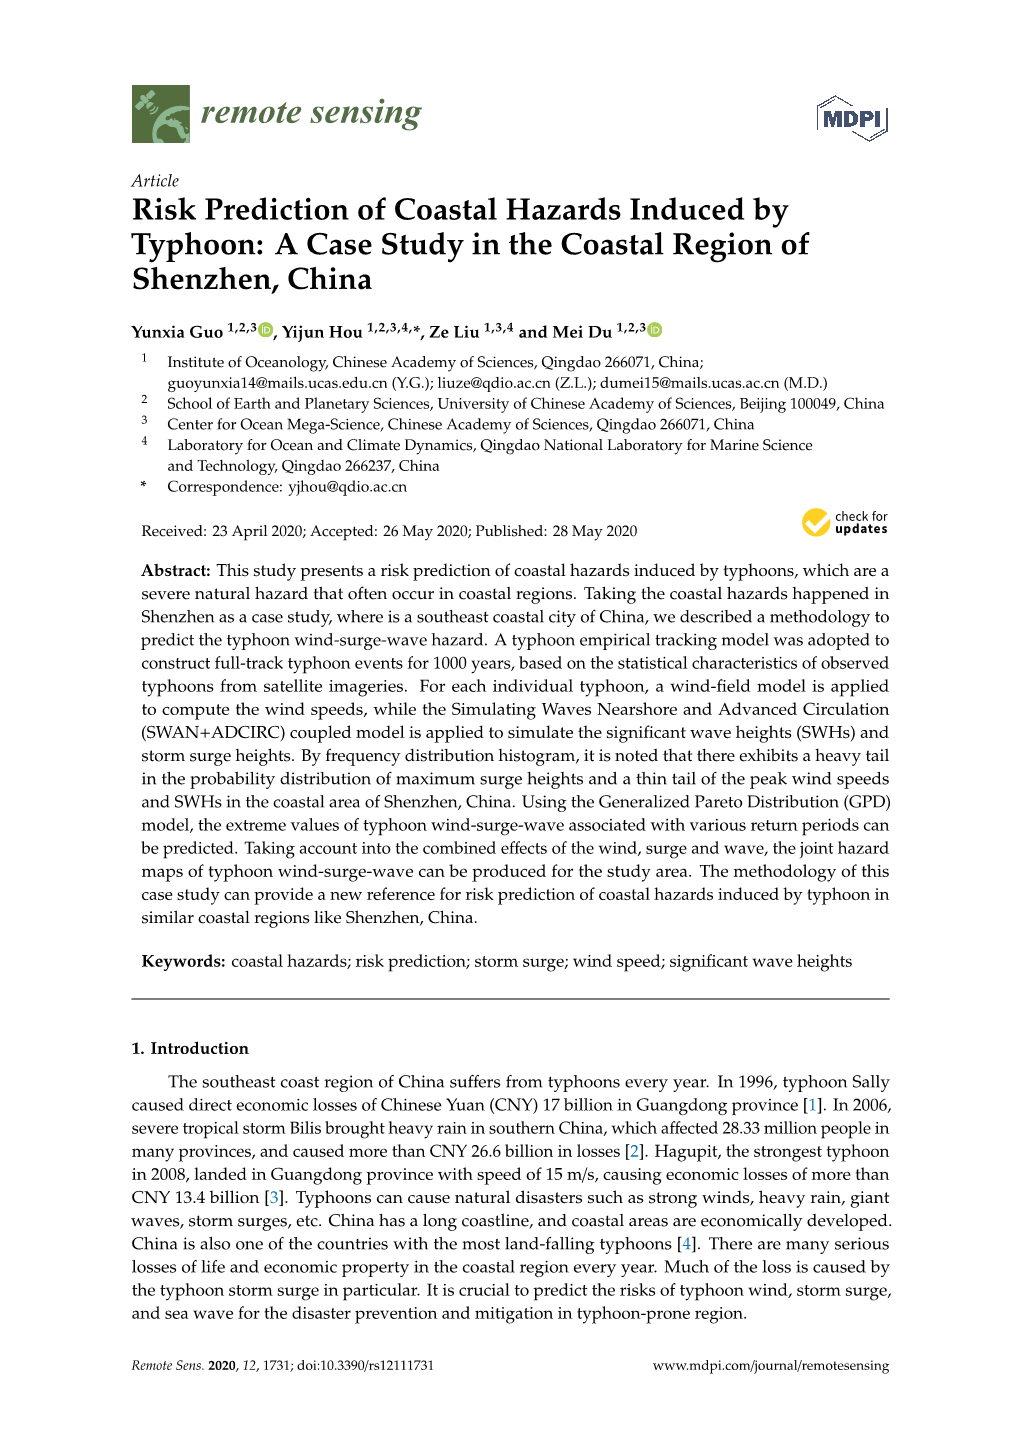 Risk Prediction of Coastal Hazards Induced by Typhoon: a Case Study in the Coastal Region of Shenzhen, China